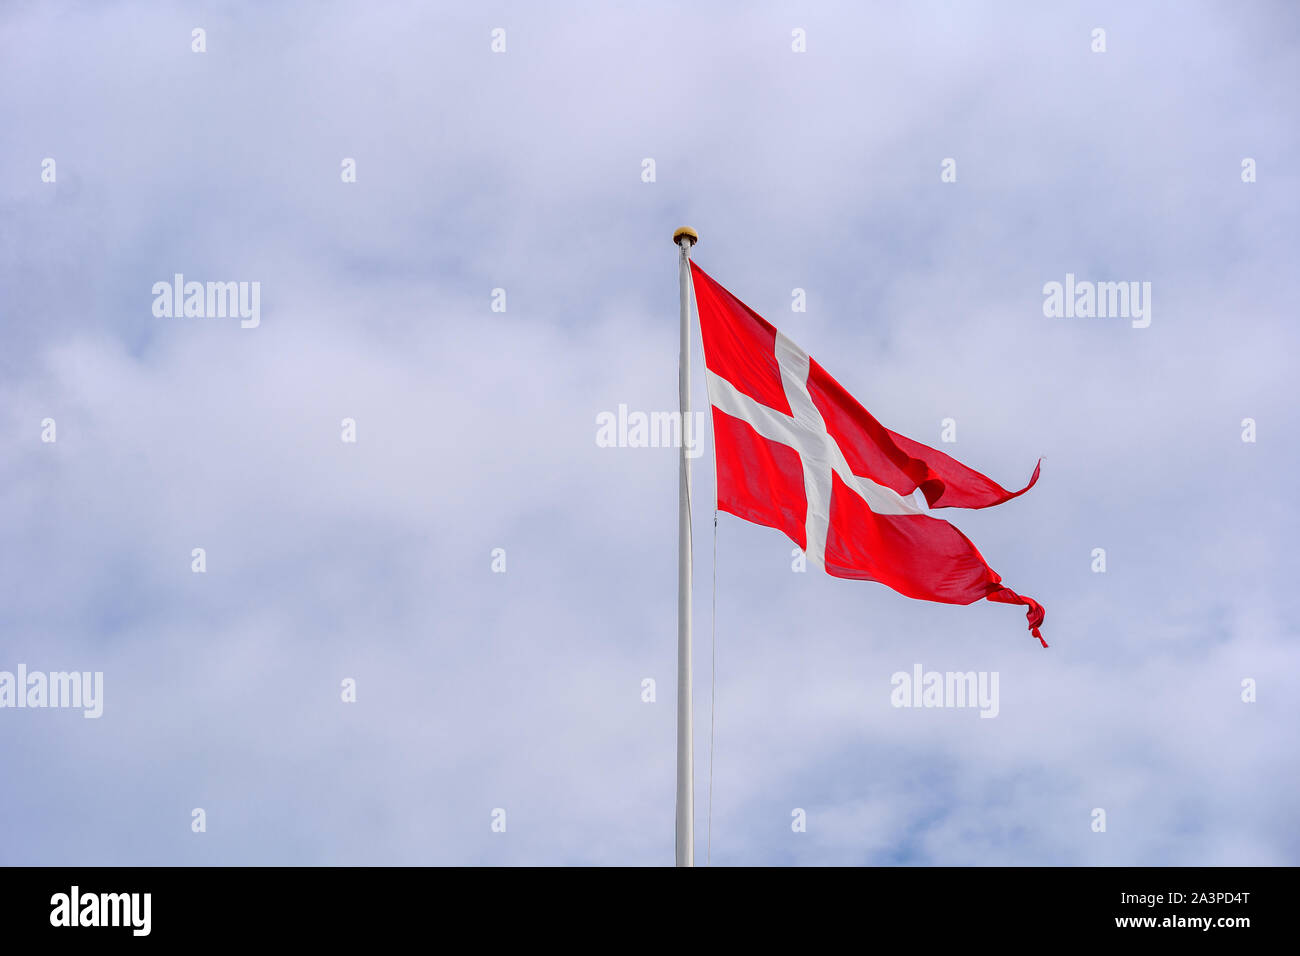 Denmark Flag blowing and waving at strong windy day against cloudy sky. Stock Photo